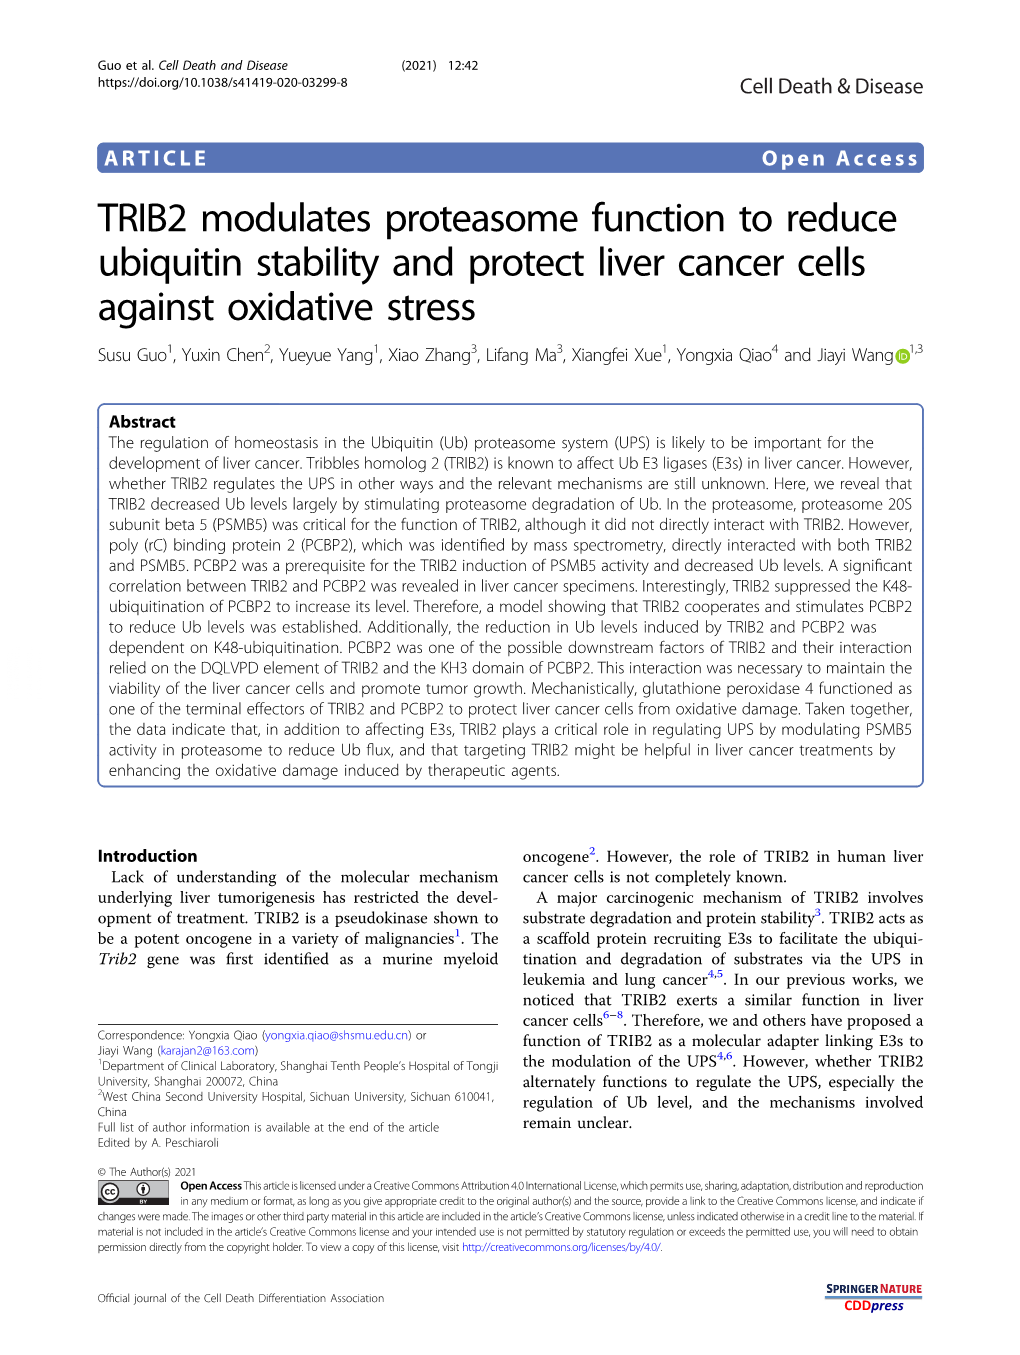 TRIB2 Modulates Proteasome Function to Reduce Ubiquitin Stability And